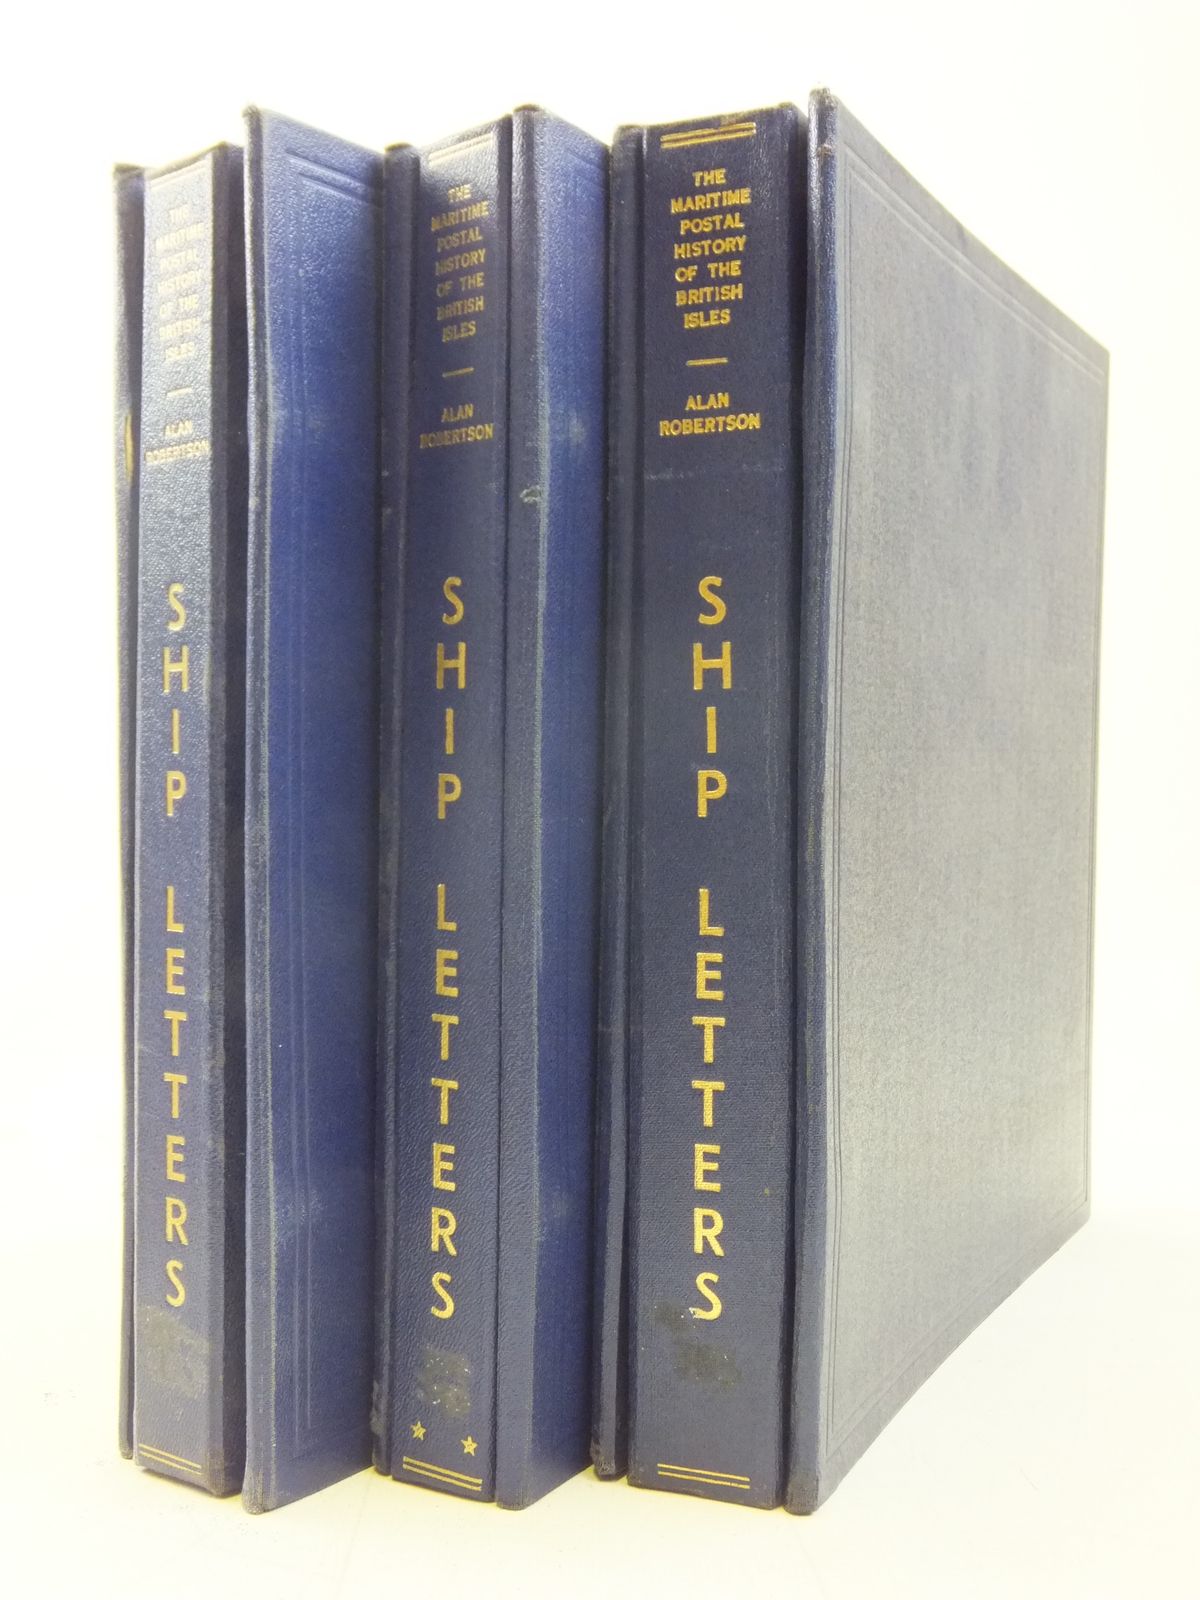 A History Of The Ship Letters Of The British Isles (3 Volumes)